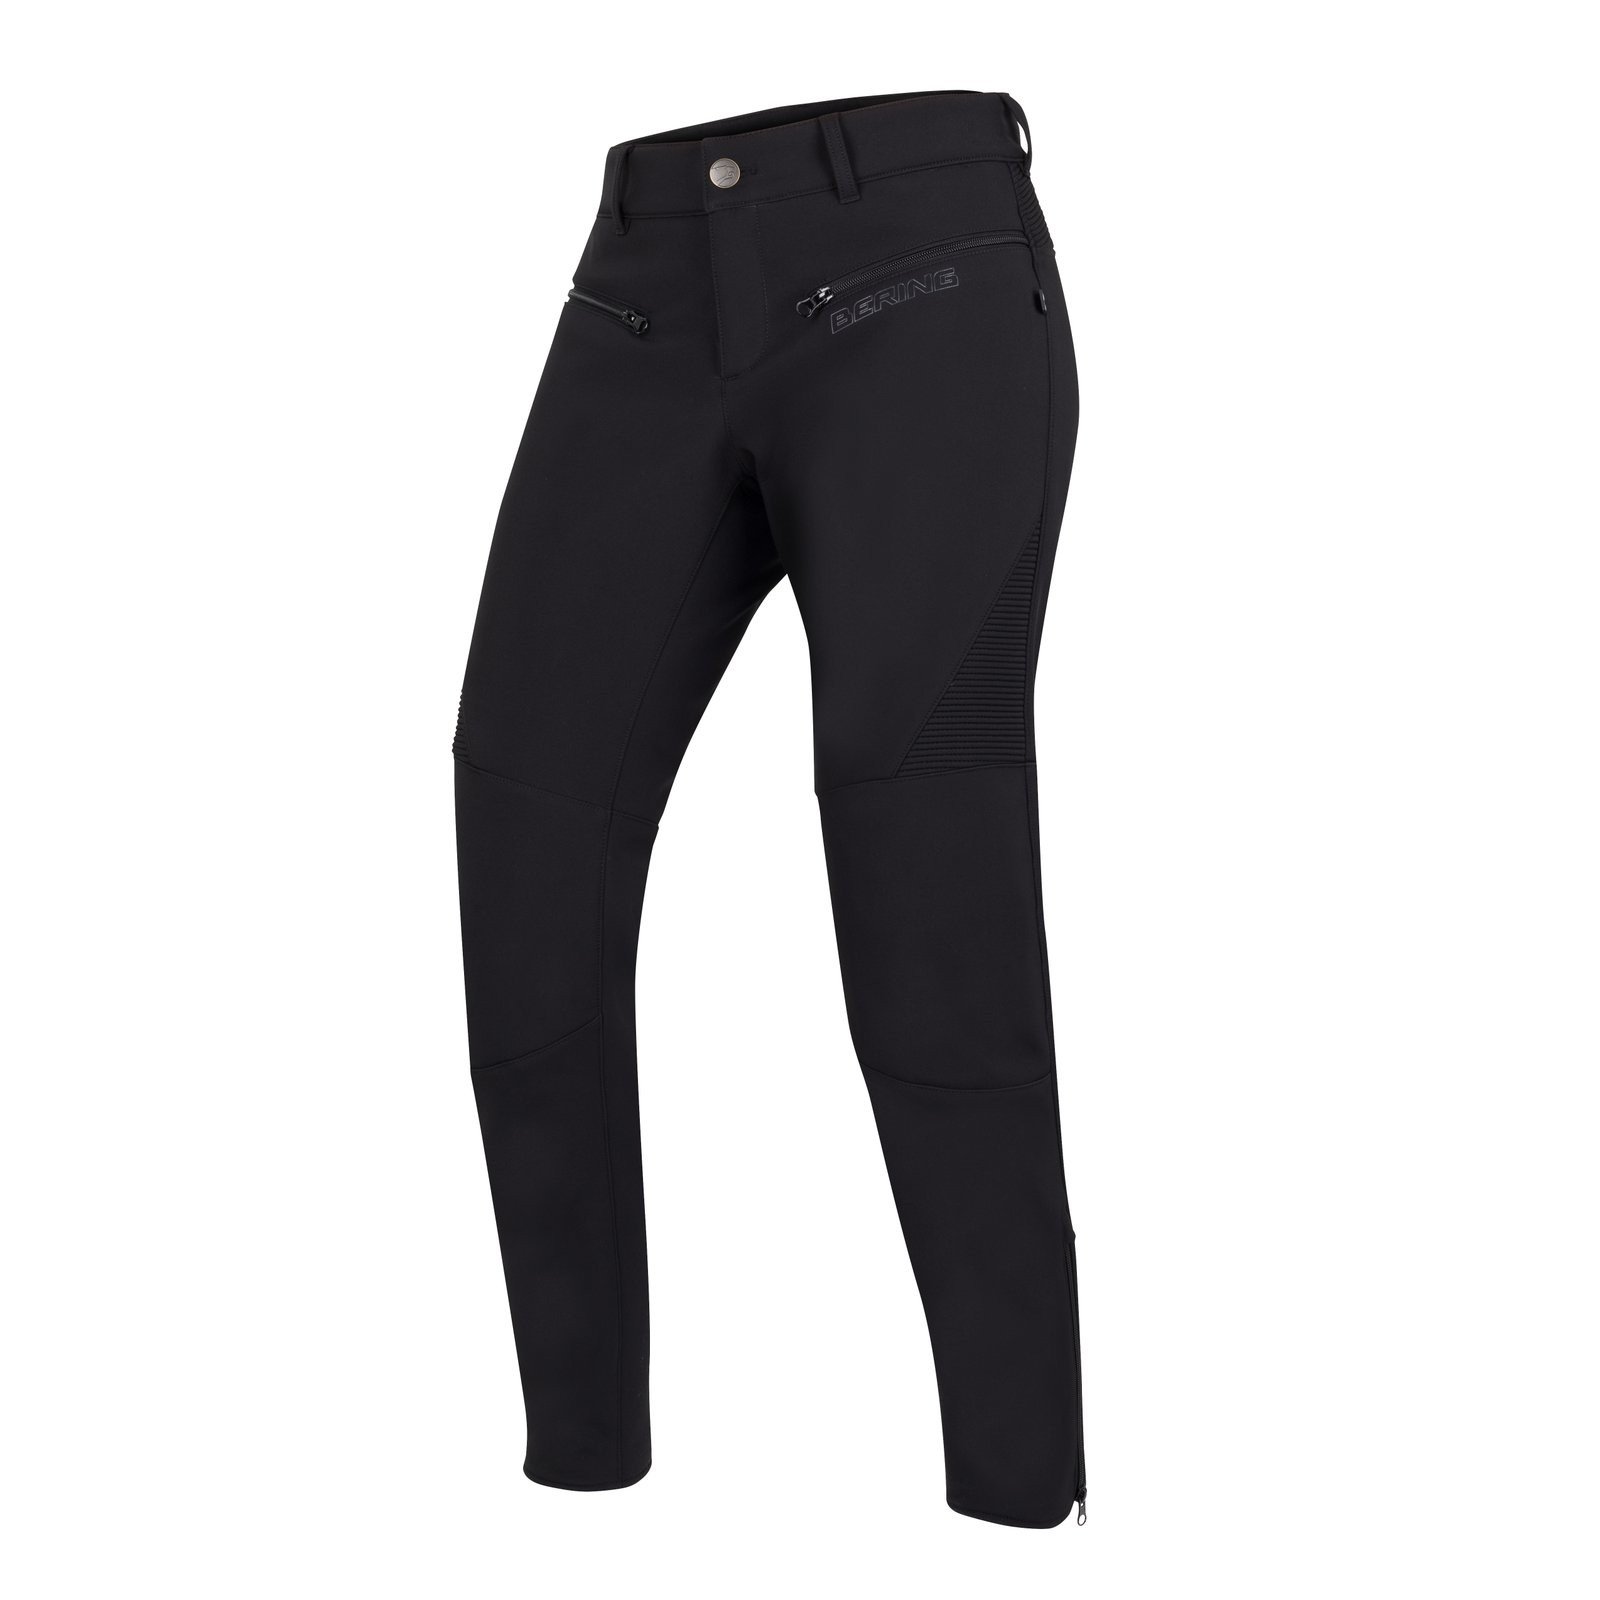 Image of Bering Lady Alkor Trousers Black Size T4 ID 3660815150856